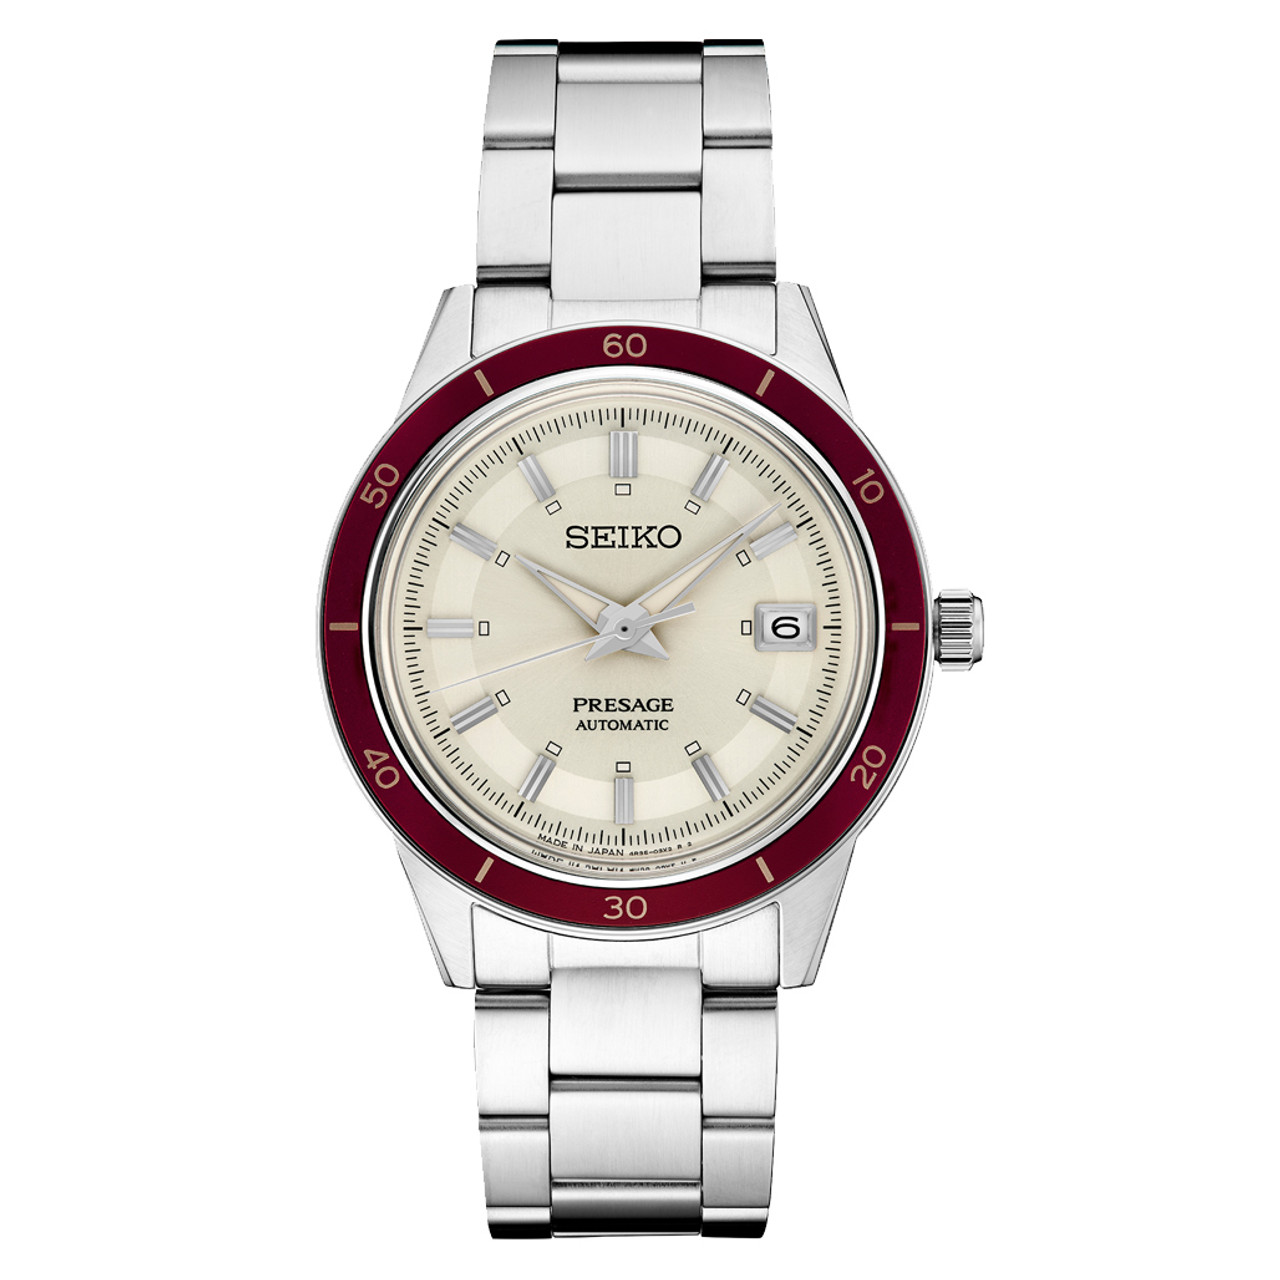 Seiko Presage Automatic 1960's Style Dress Watch with White Dial and Red  Bezel #SRPH93